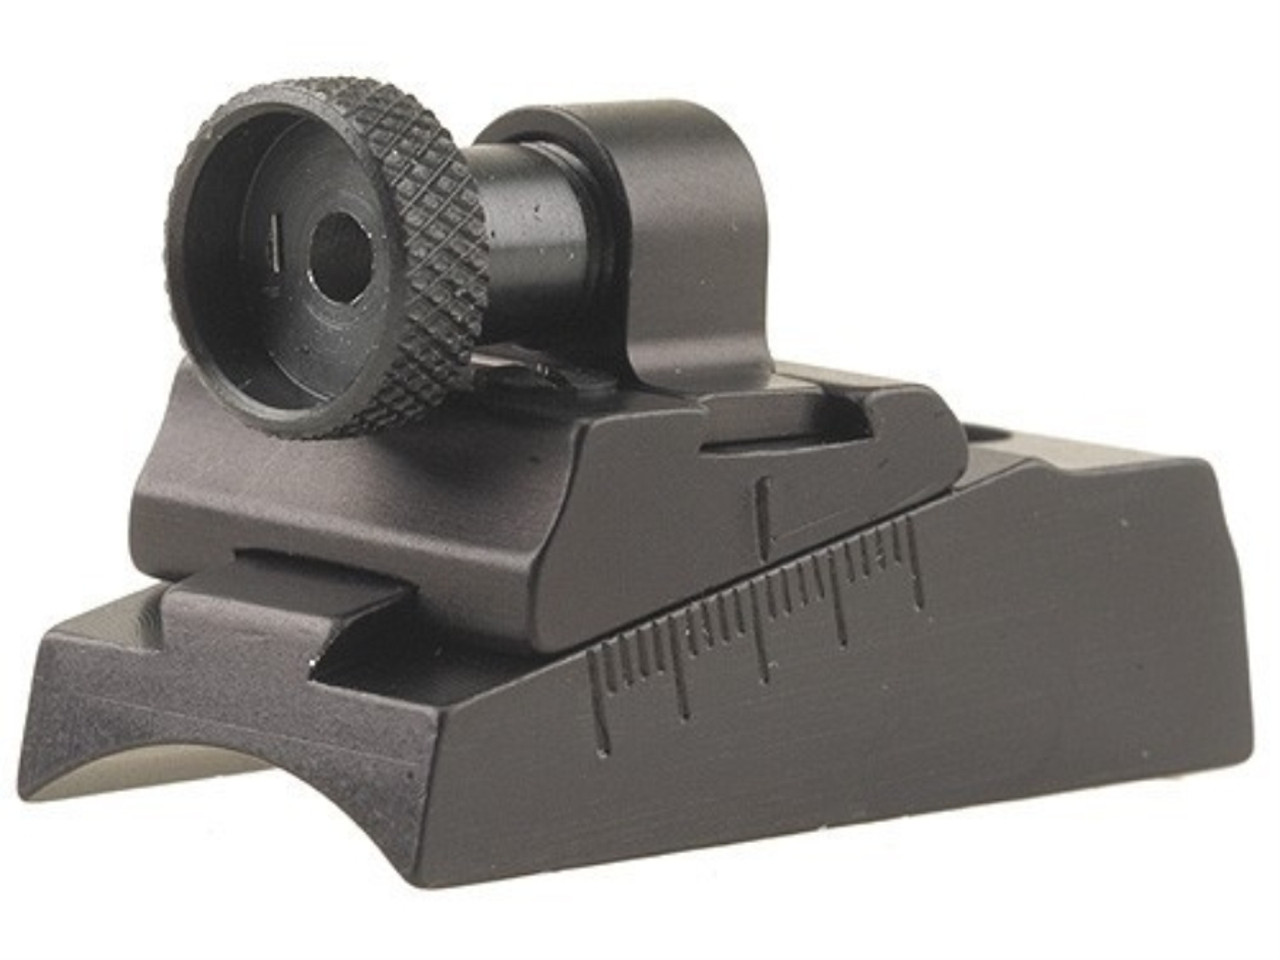 Williams Legend Receiver Peep Sight for Knight Bighorn Legend Muzzleloaders